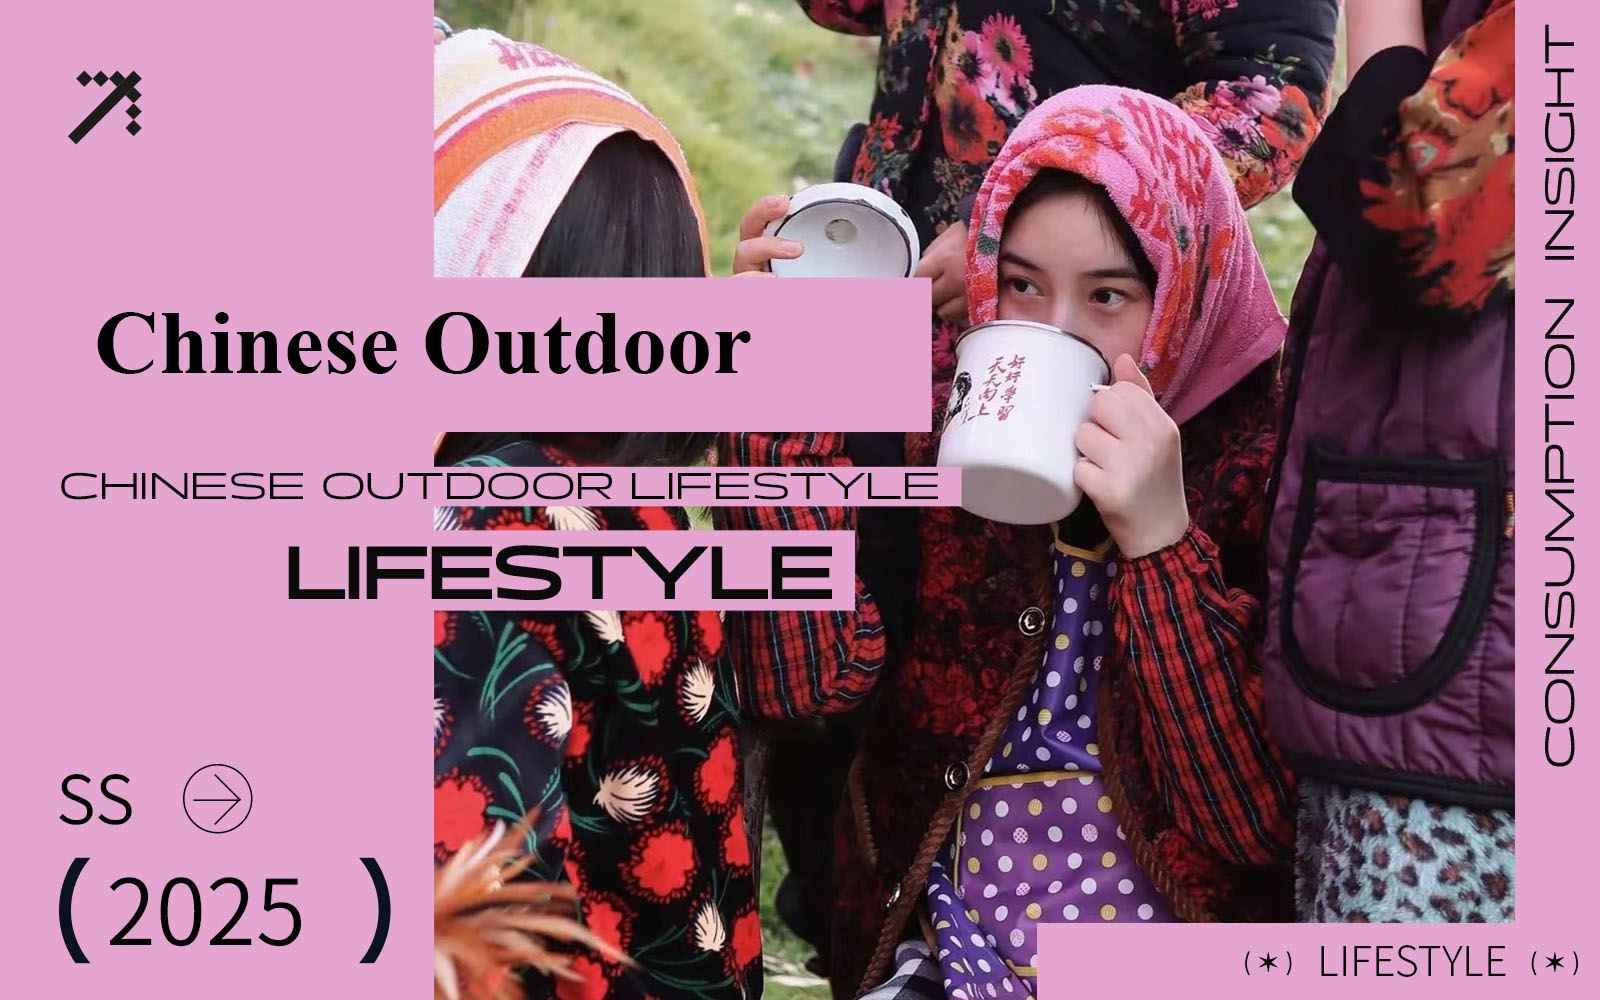 Chinese Outdoor -- S/S 2025 Lifestyle Prediction